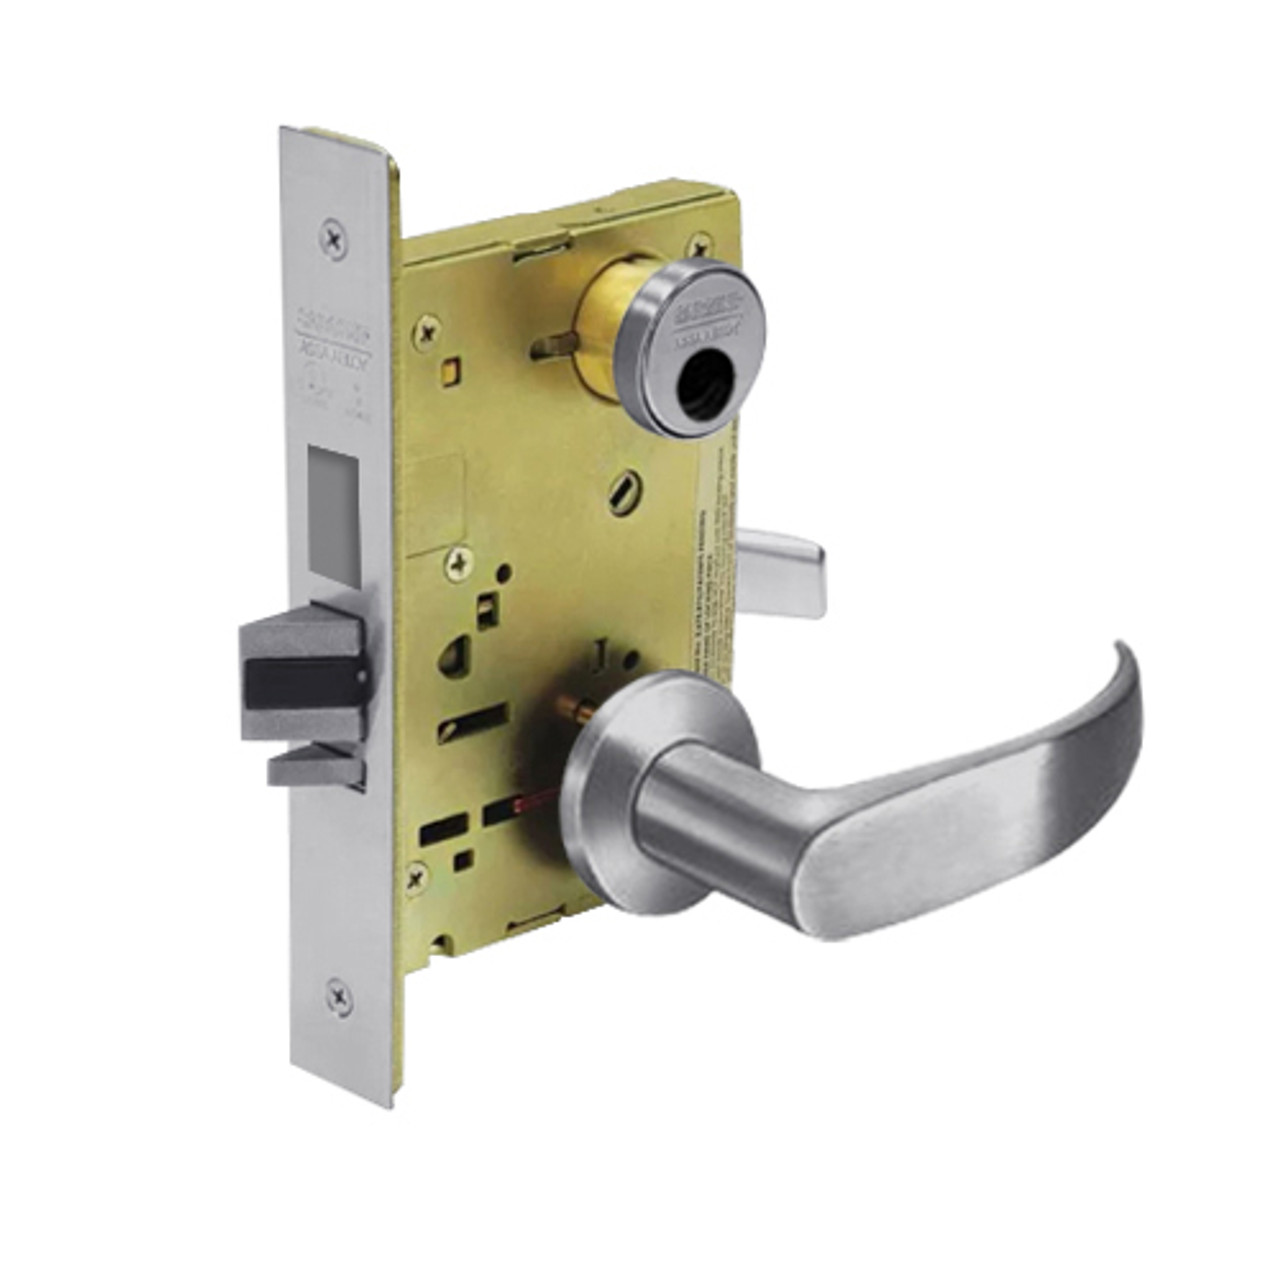 LC-8249-LNP-26D Sargent 8200 Series Security Deadbolt Mortise Lock with LNP Lever Trim Less Cylinder in Satin Chrome